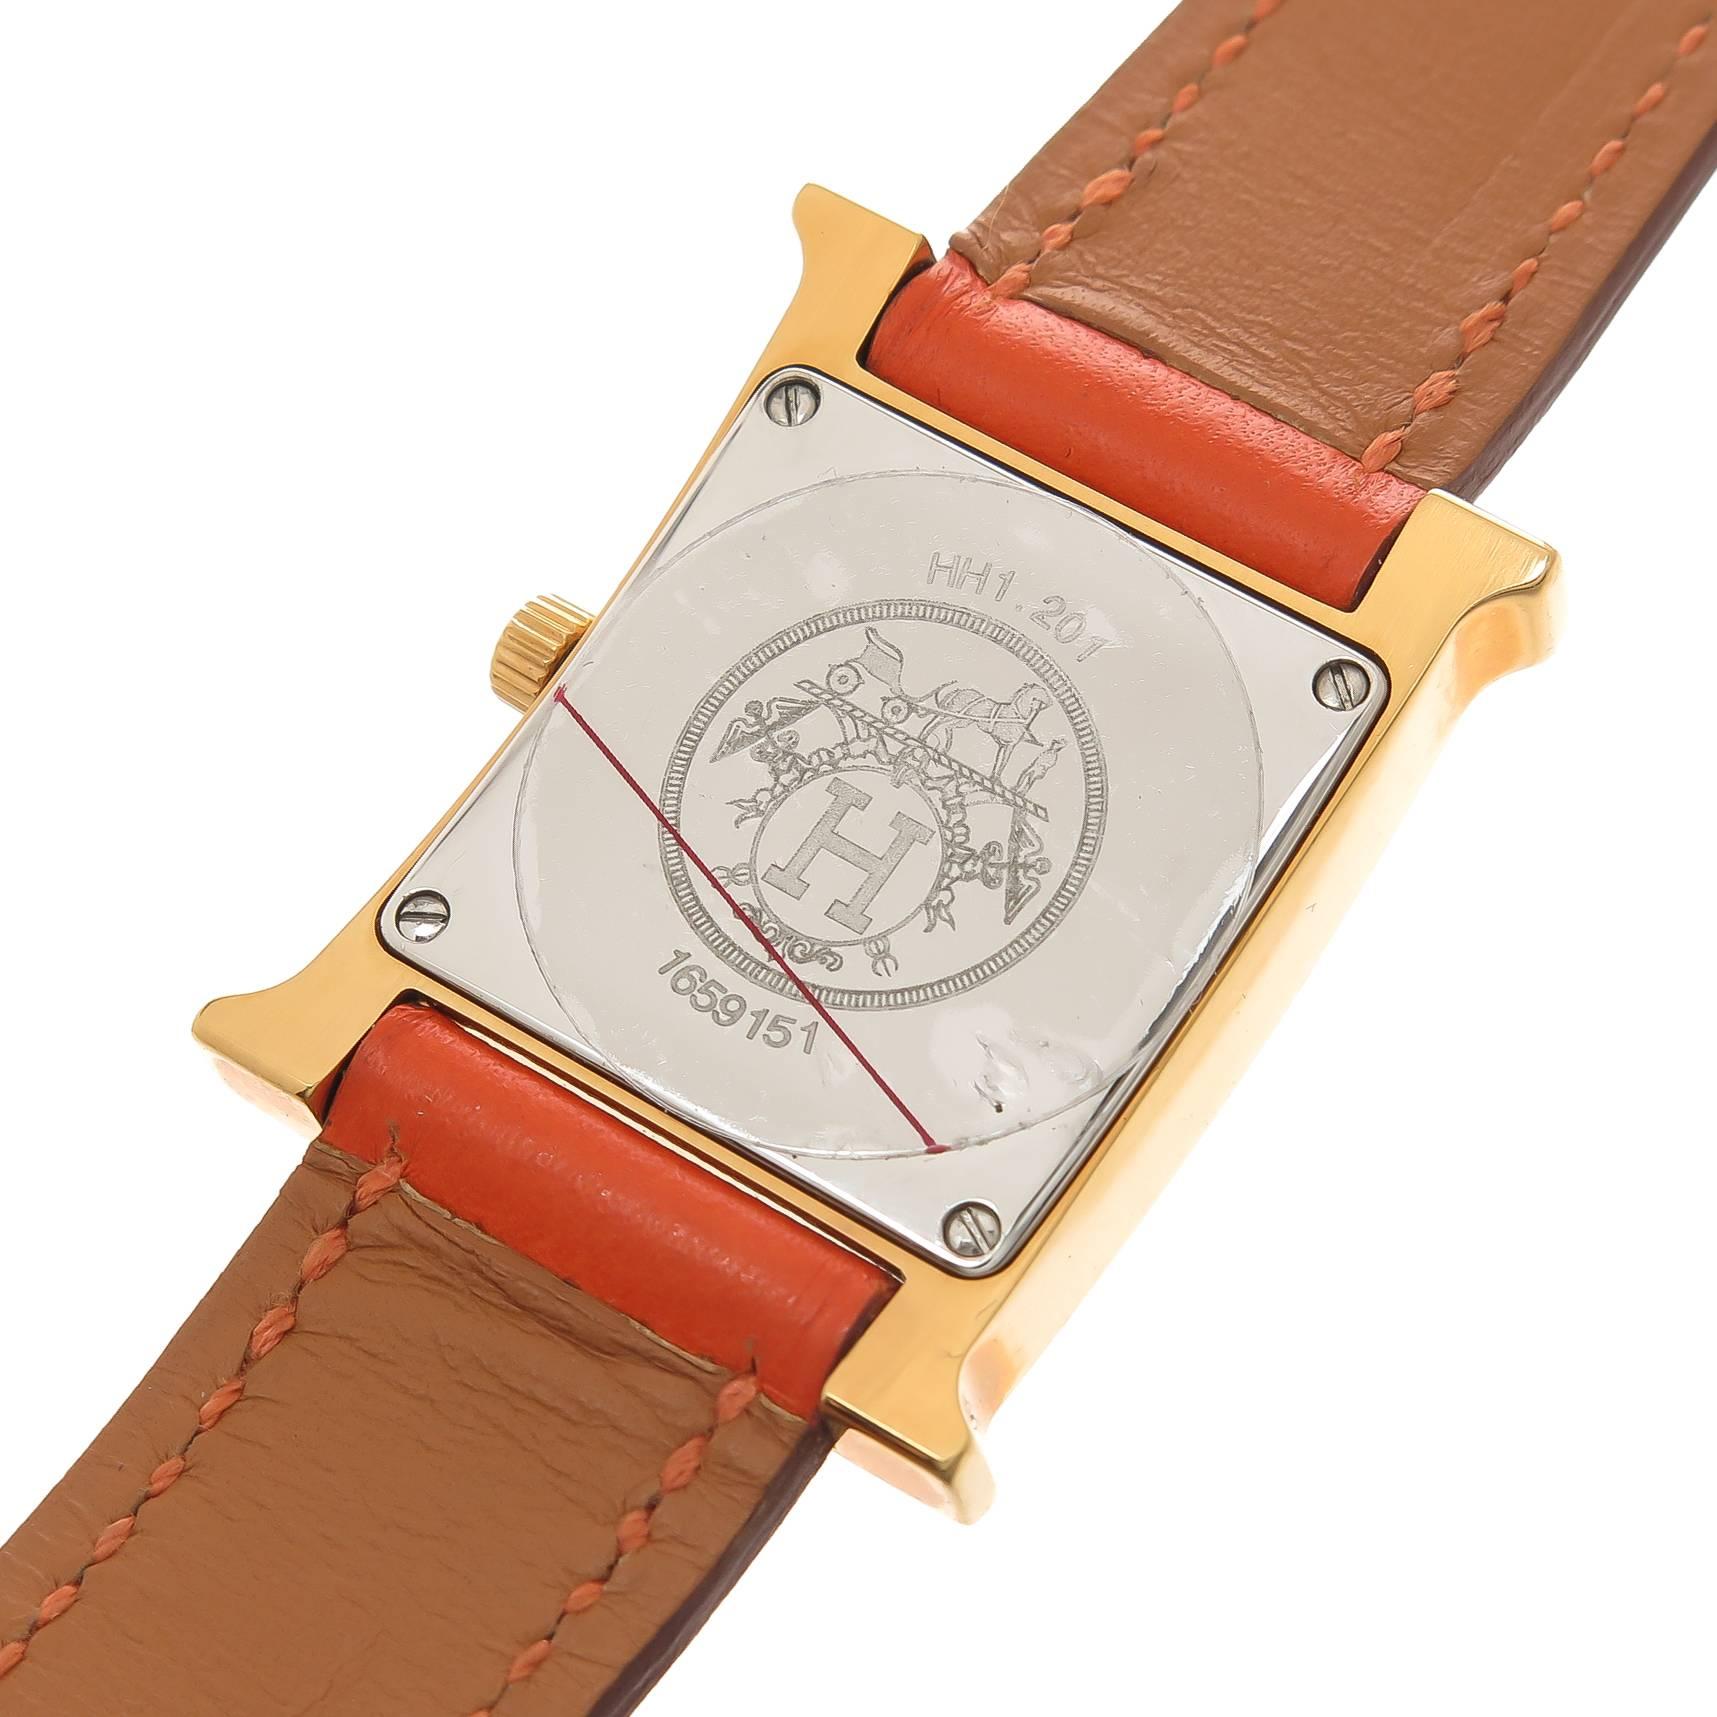 Circa 2013 Hermes Classic H Ladies Wrist watch 30 X 20 MM water resistant Gold Plate with Stainless Steel back case. Quartz movement, 